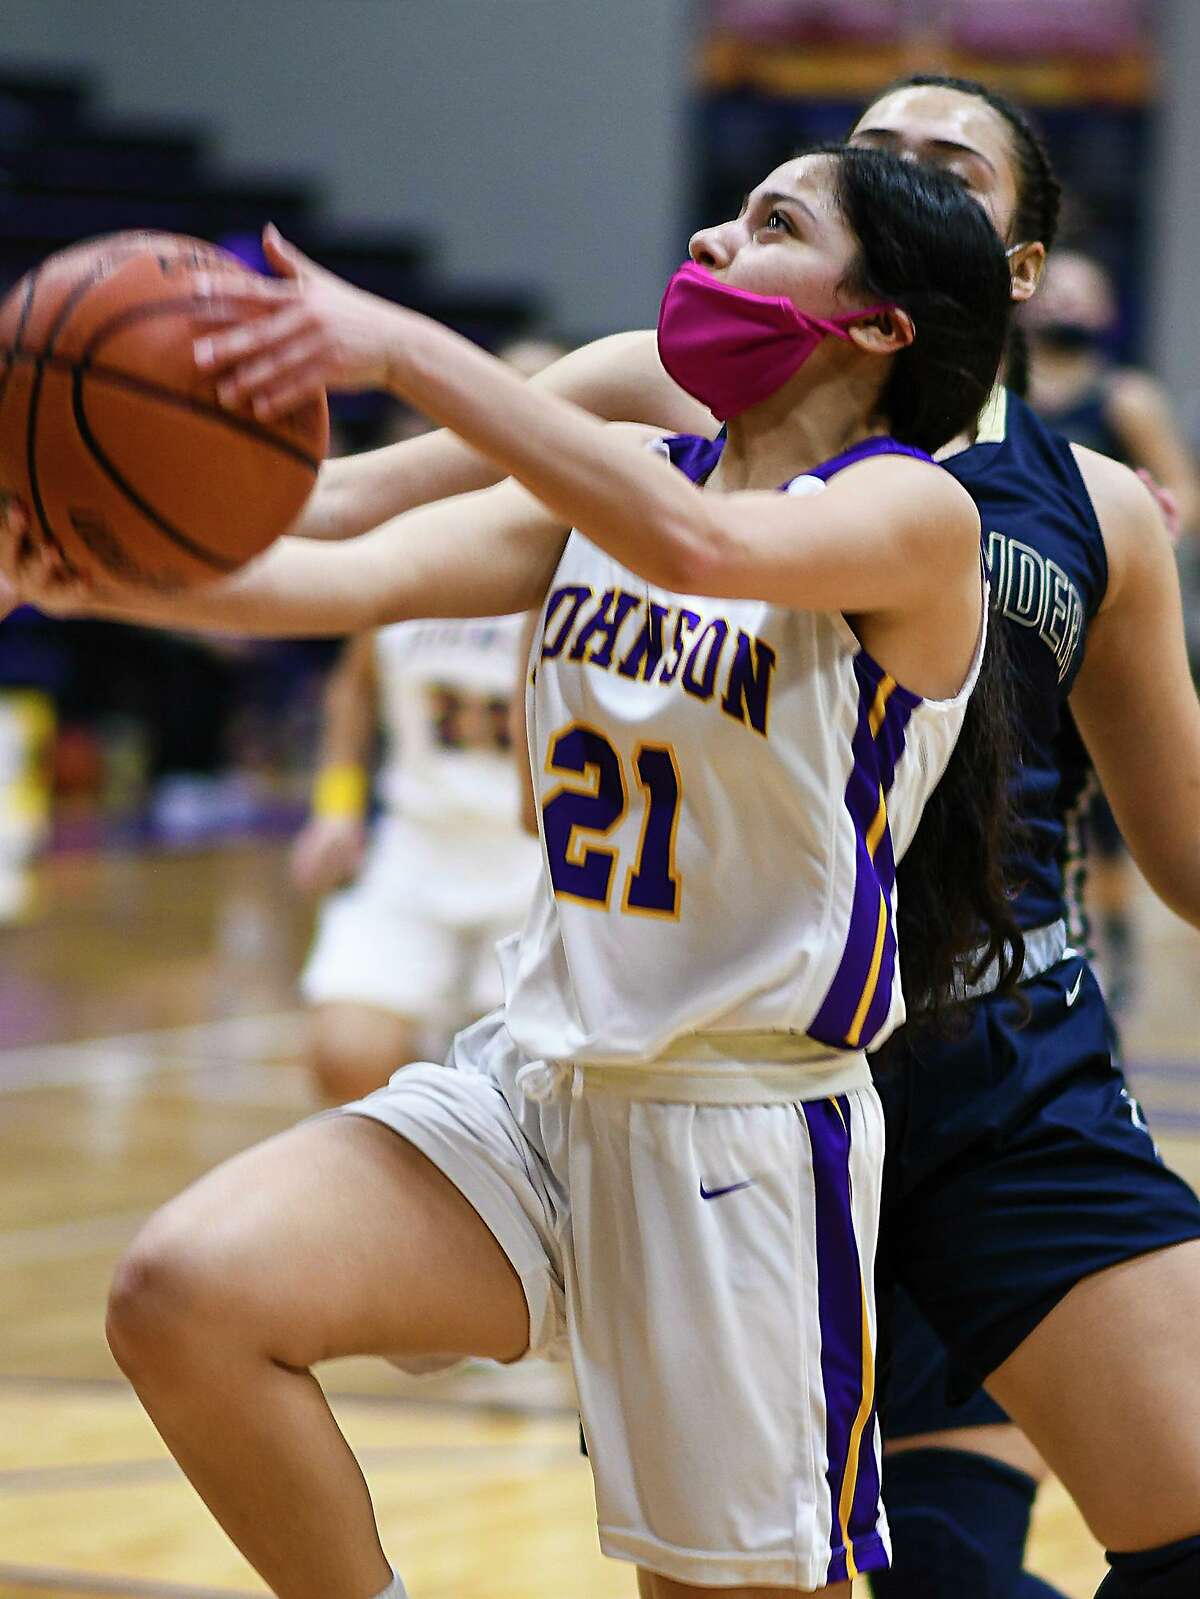 LBJ’s Leilana Medina goes for a layup during a game against Alexander High School.